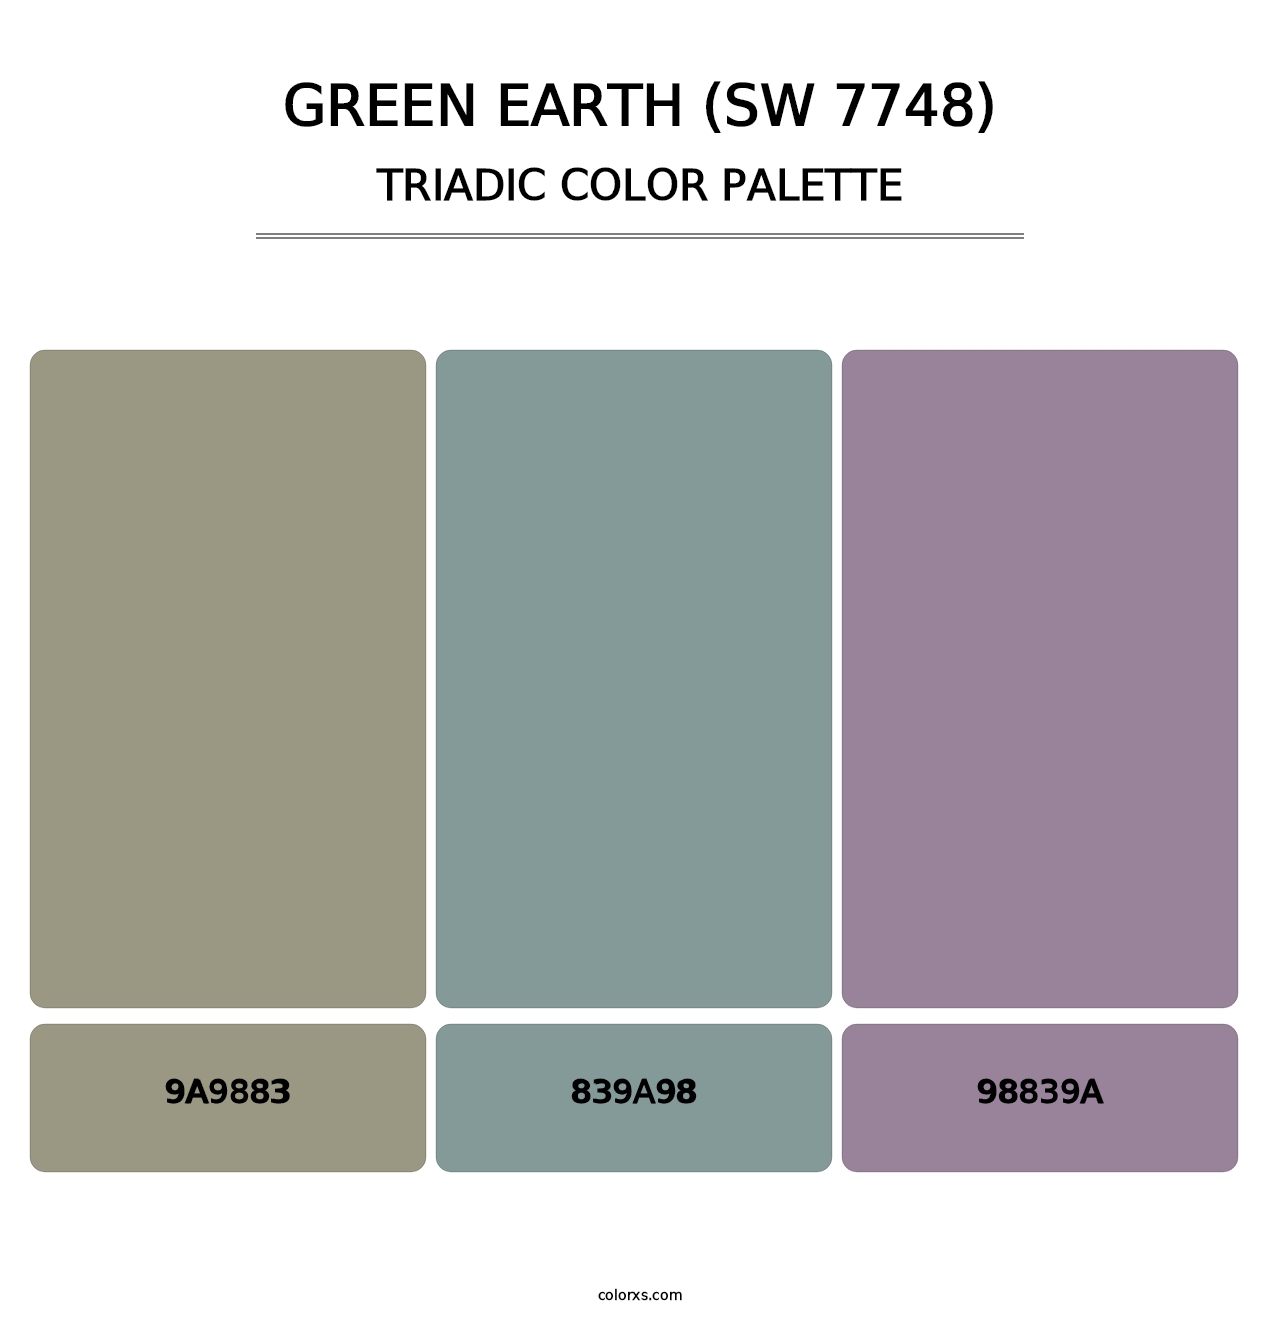 Green Earth (SW 7748) - Triadic Color Palette